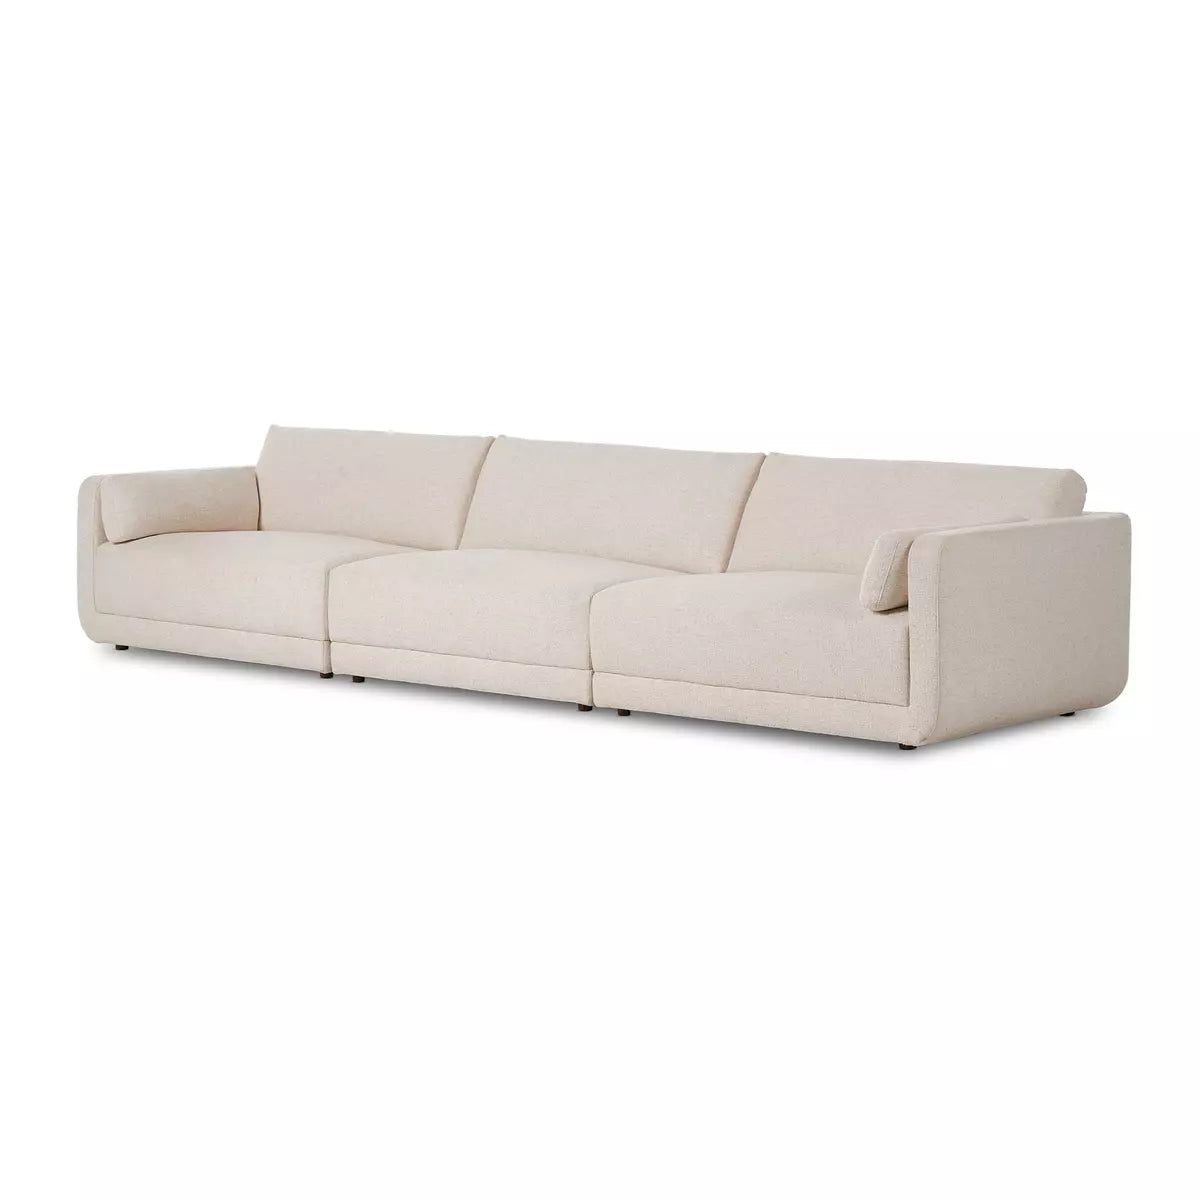 Toland 3 - Piece Sectional